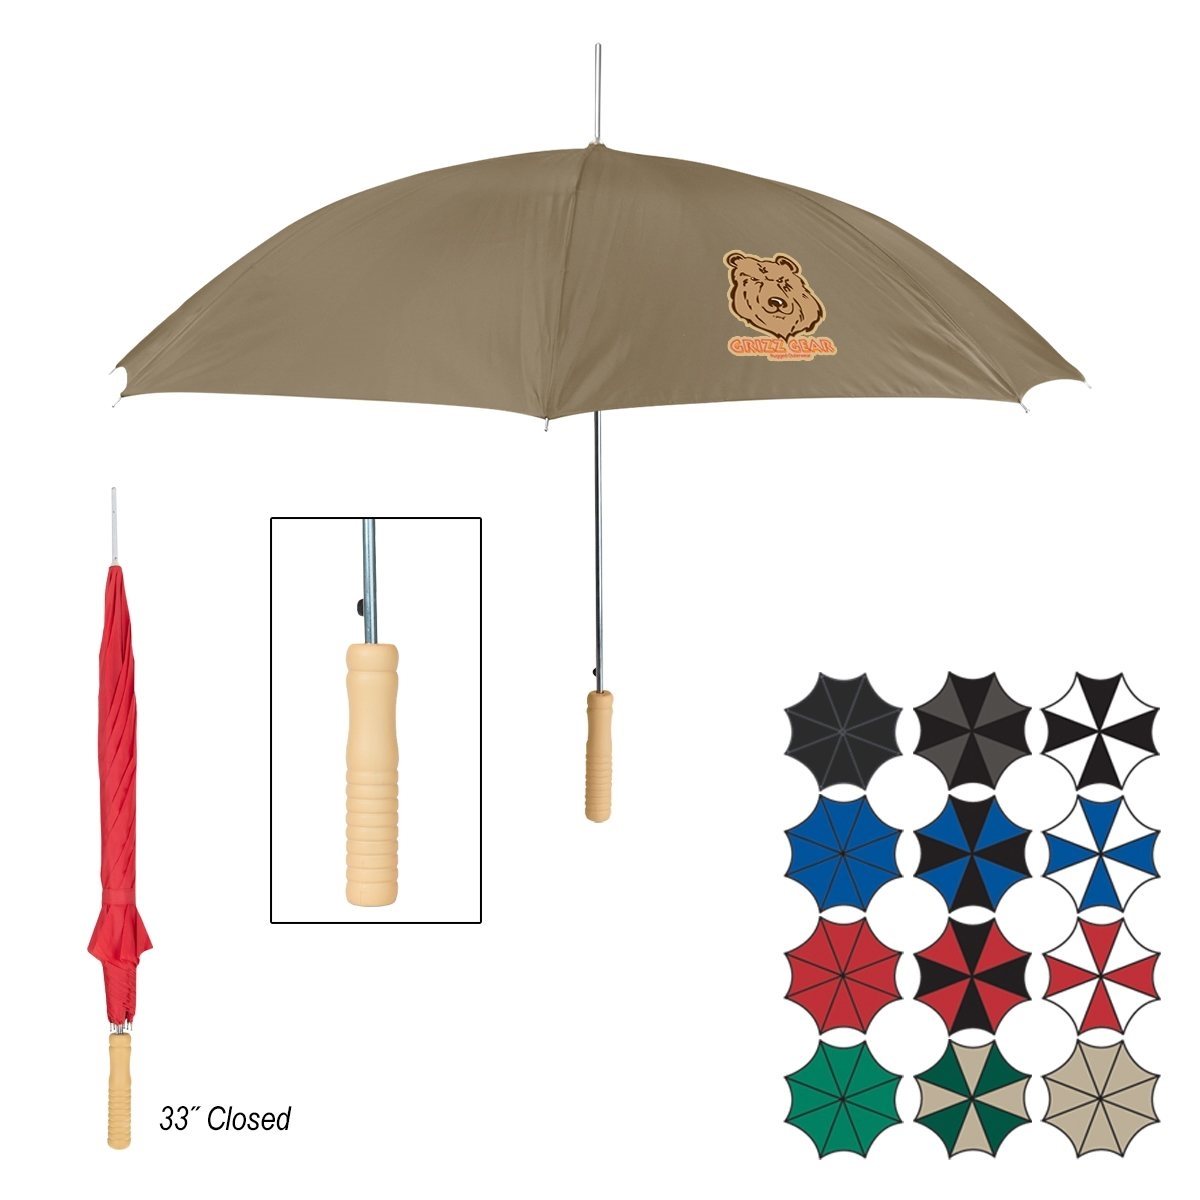 How does an umbrella protect you?